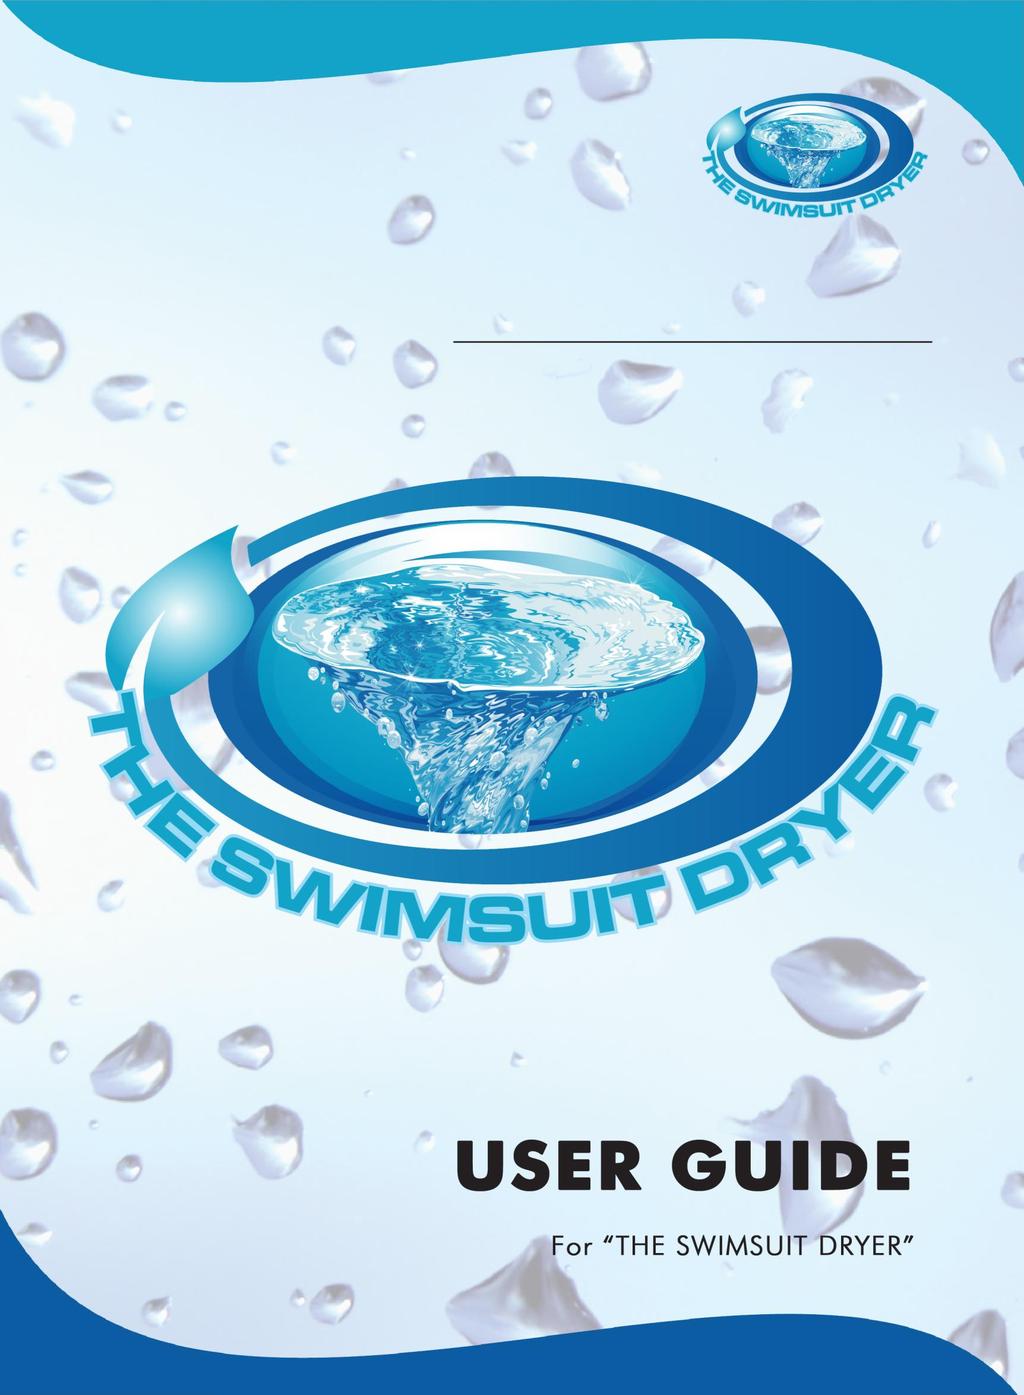 User Guide For THE SWIMSUIT DRYER.